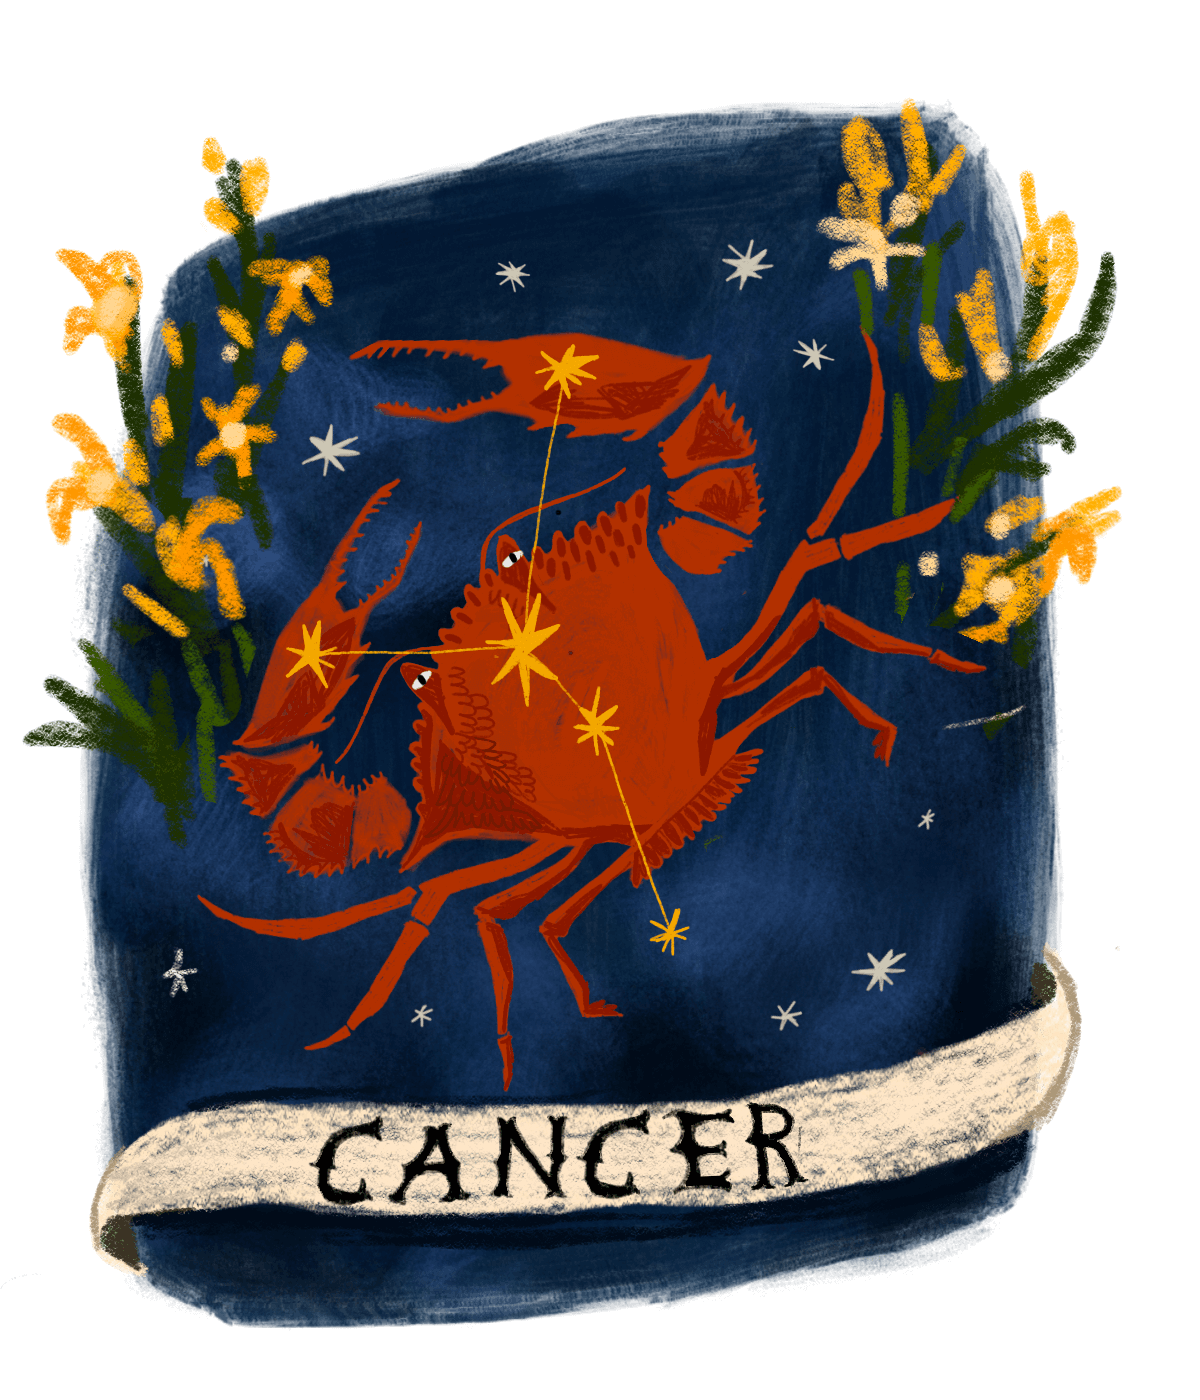 An illustration of the Cancer star sign.